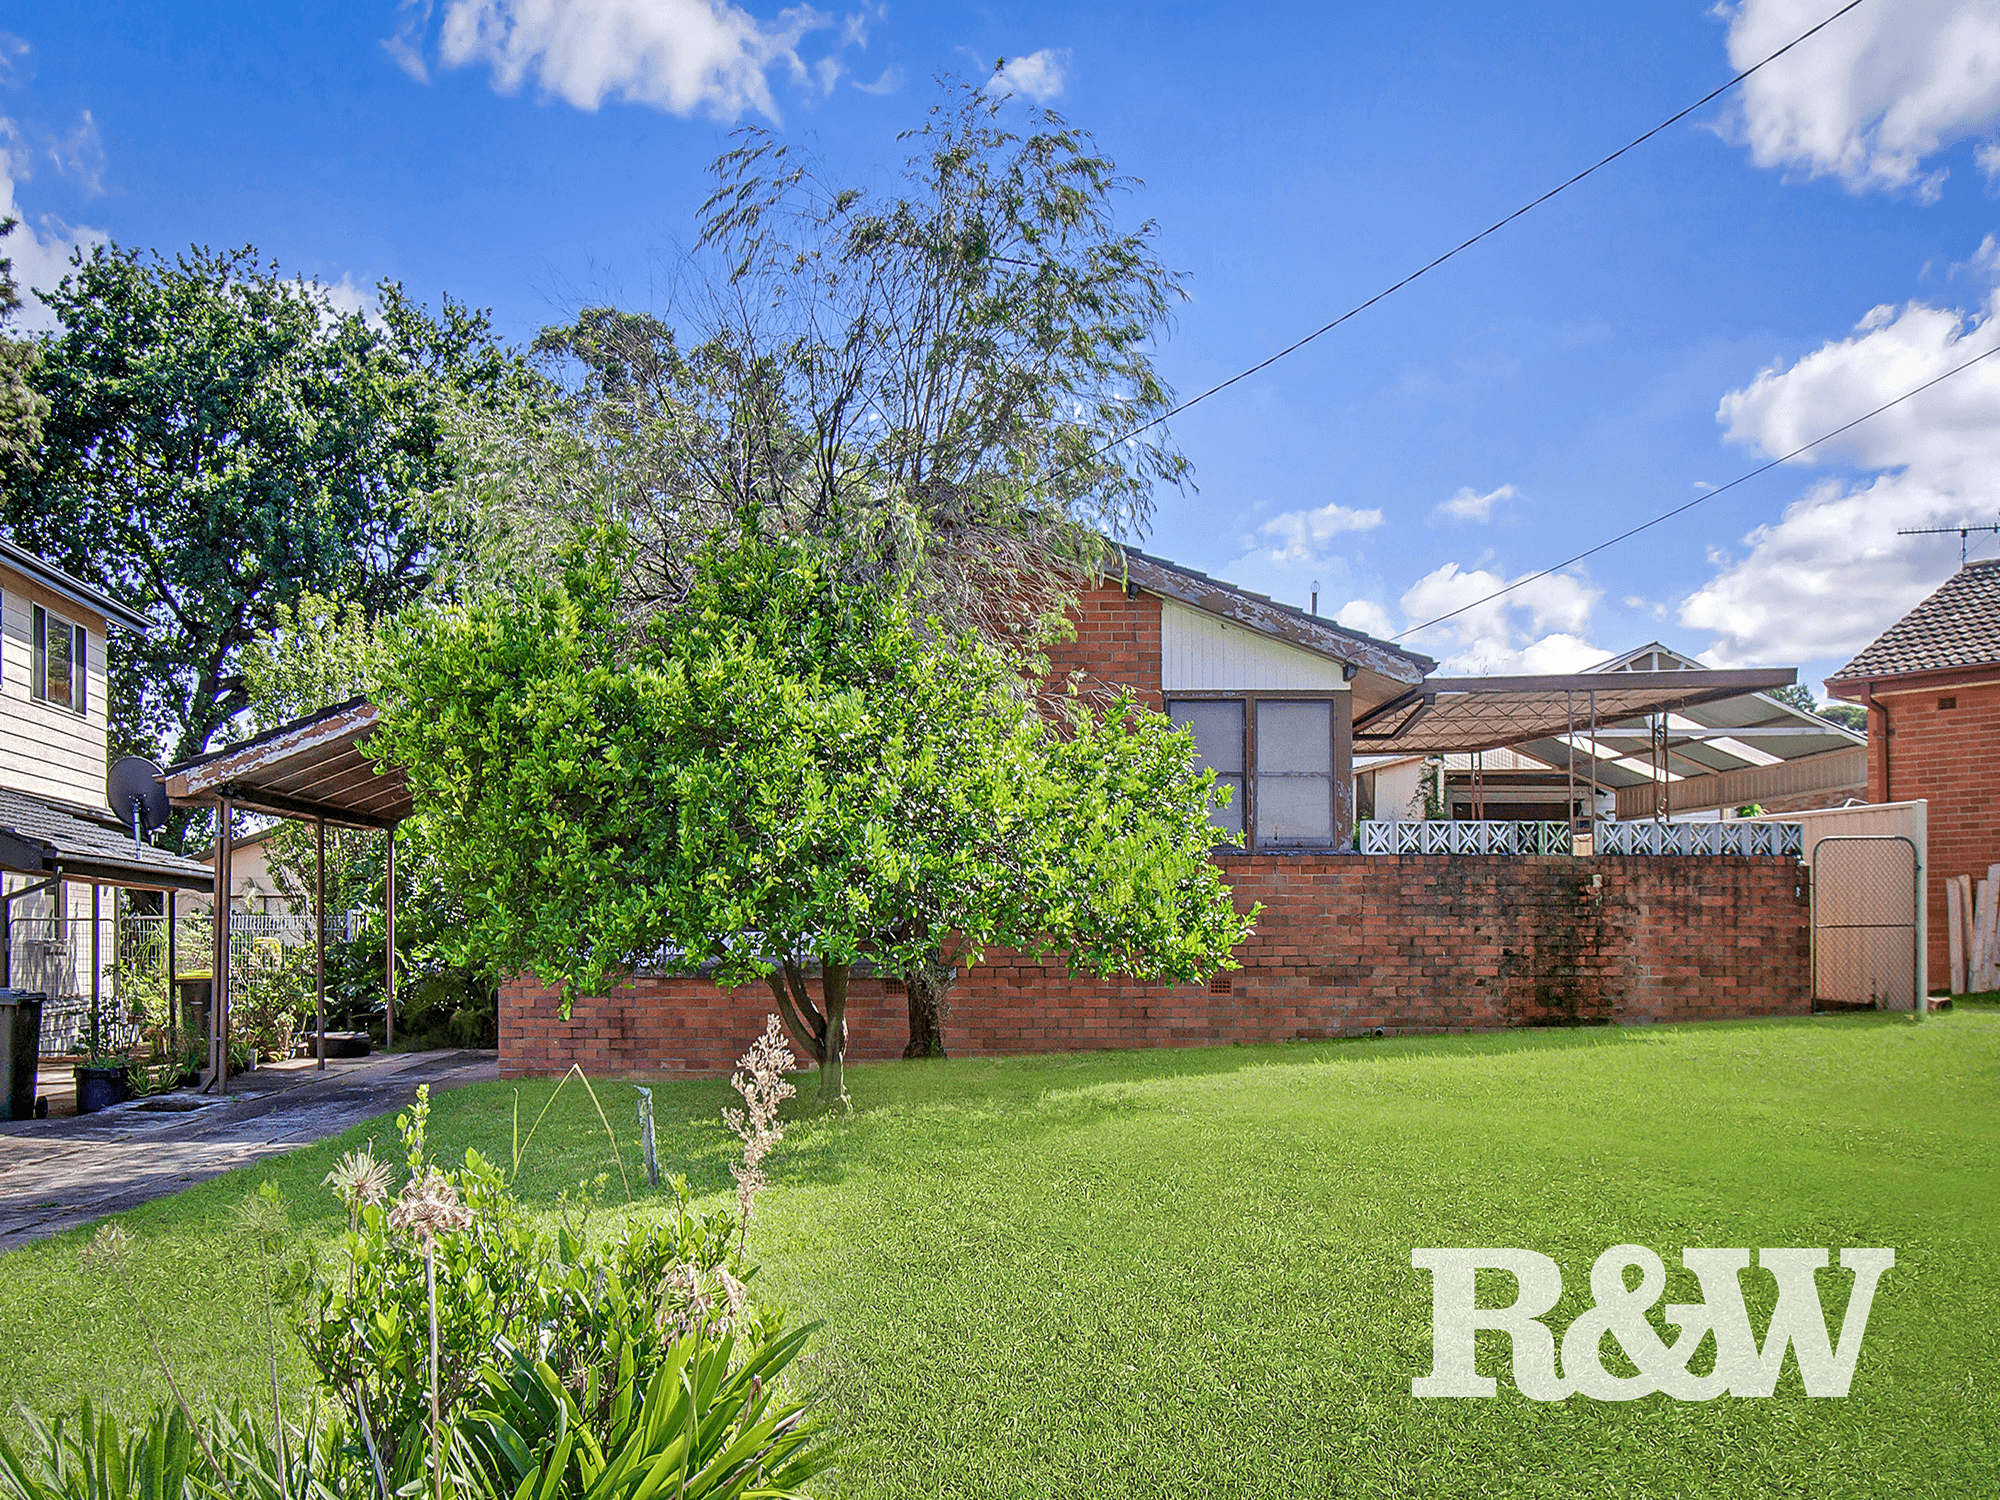 86 Luxford Road, WHALAN, NSW 2770